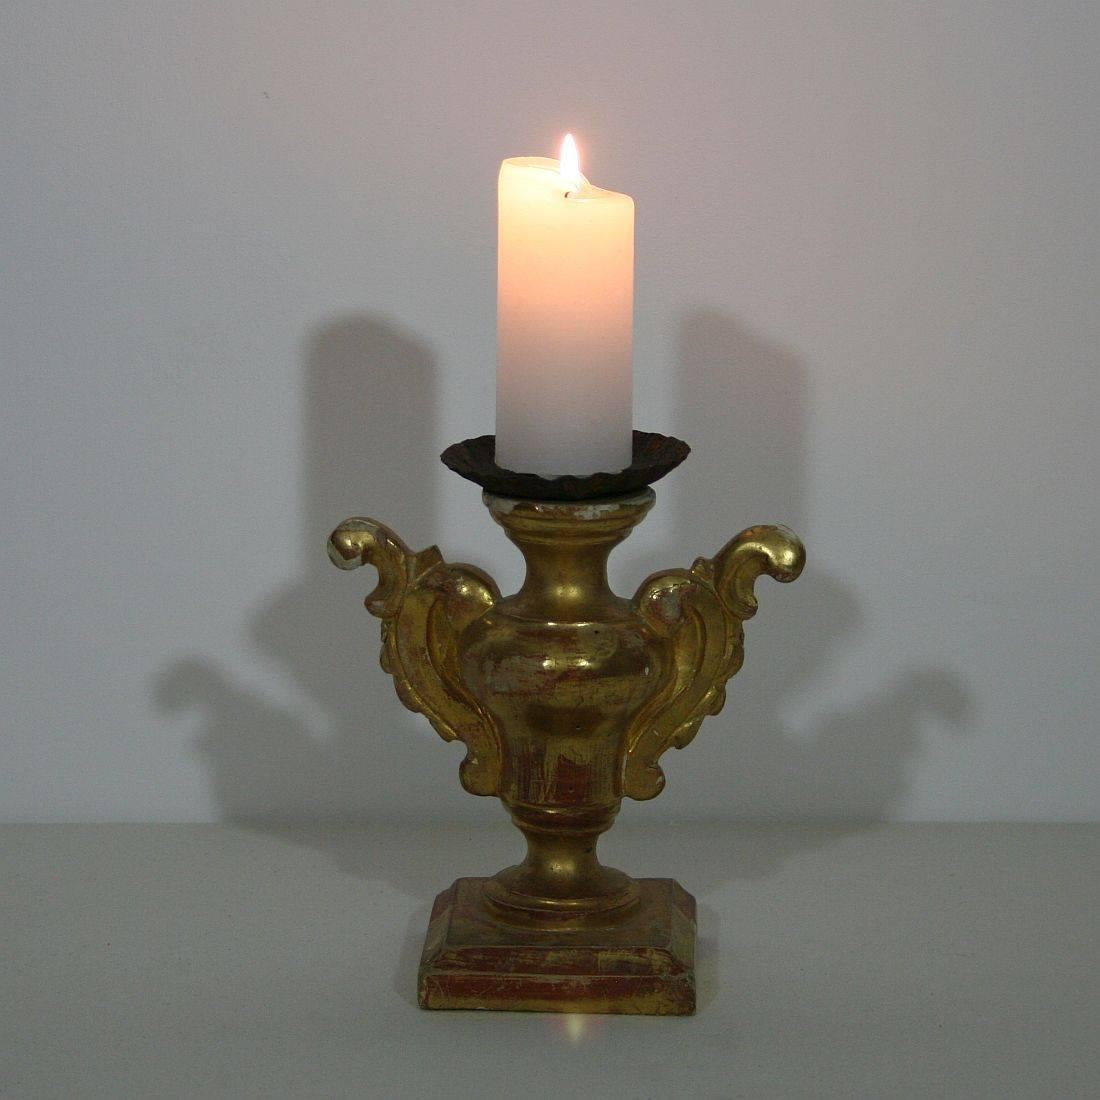 Small and unique Baroque giltwood candleholder, Italy, circa 1750. Weathered and some small losses on the gilding.